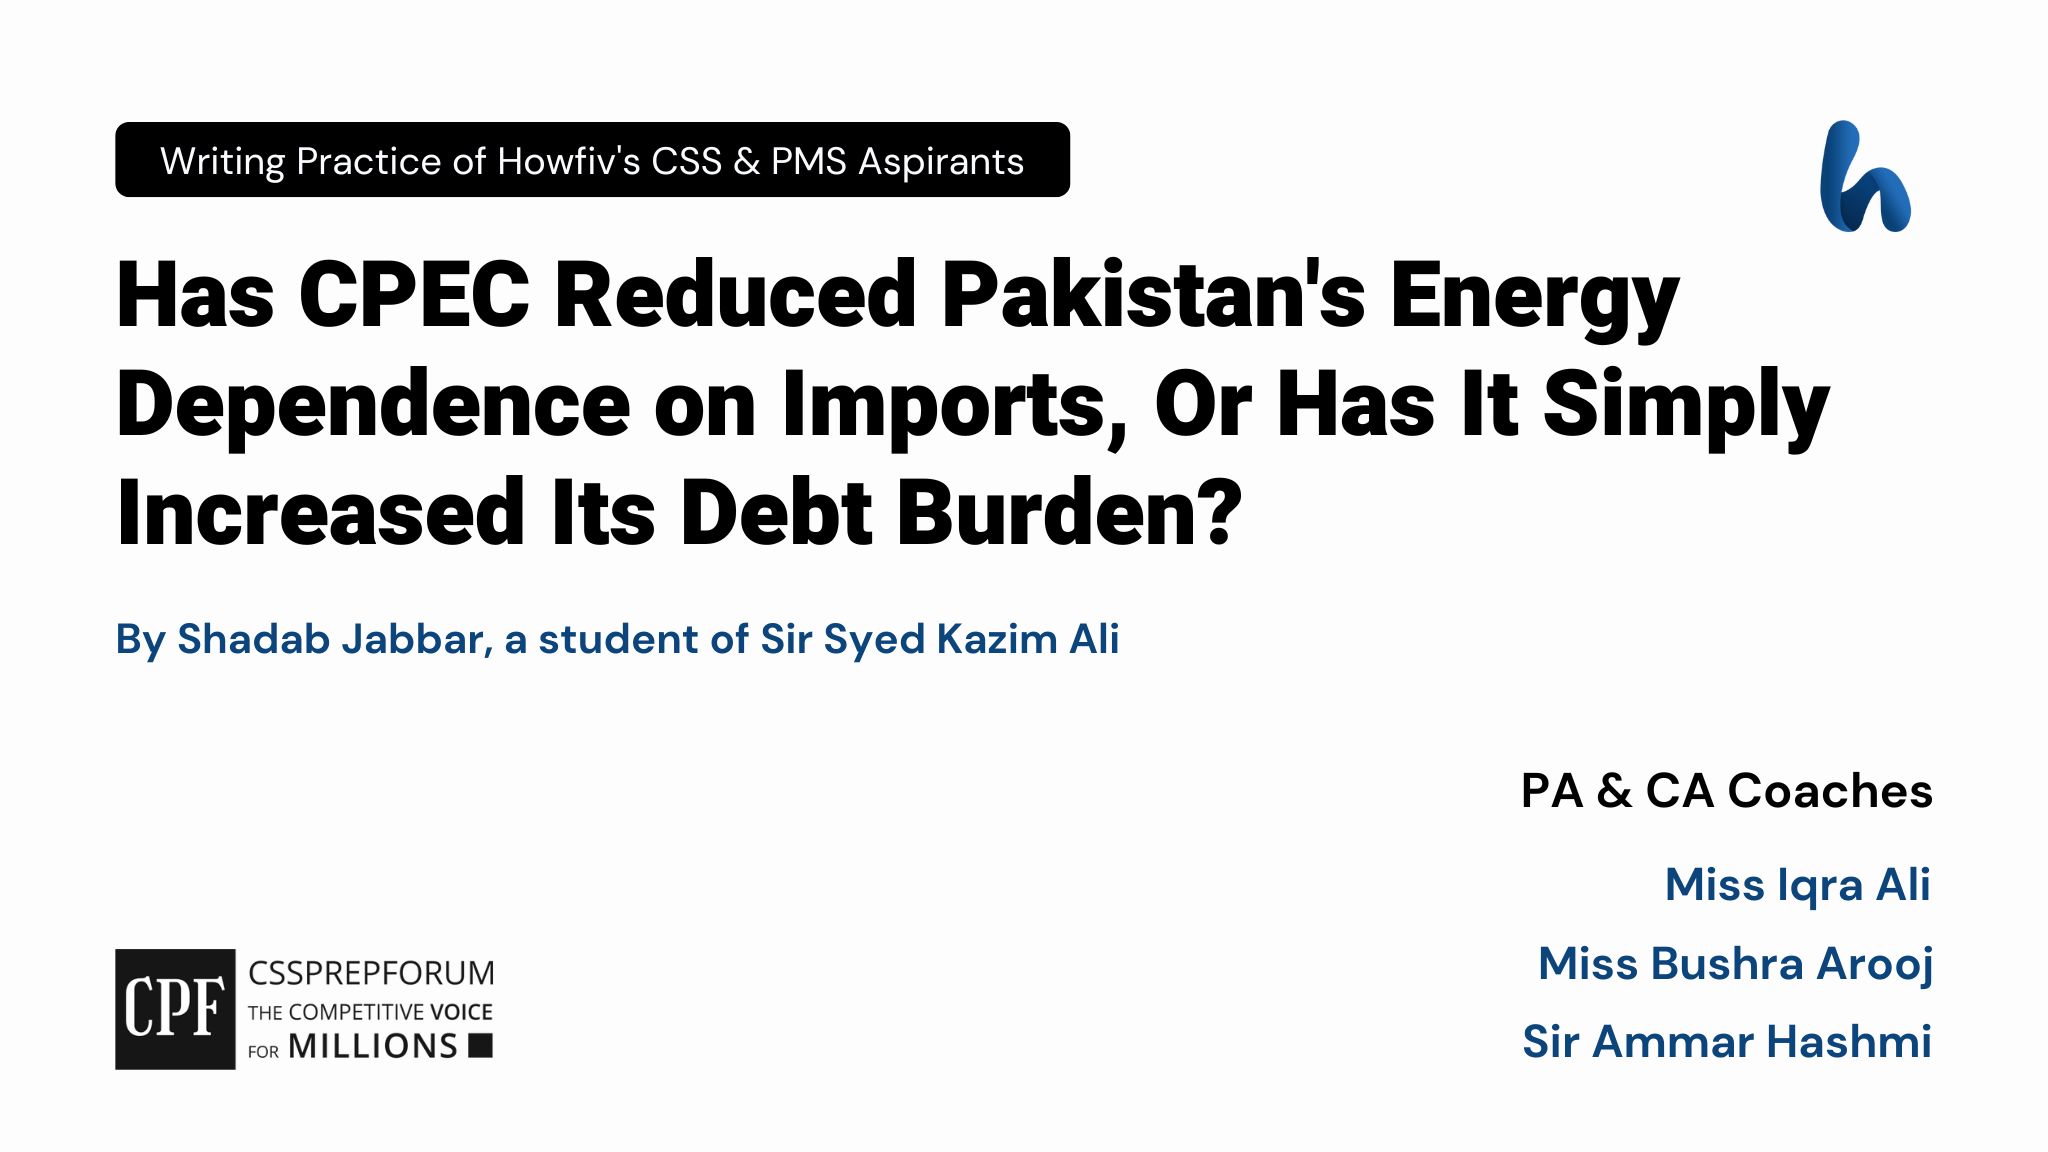 CPEC and Pakistan's Energy Dependency by Shadab Jabbar